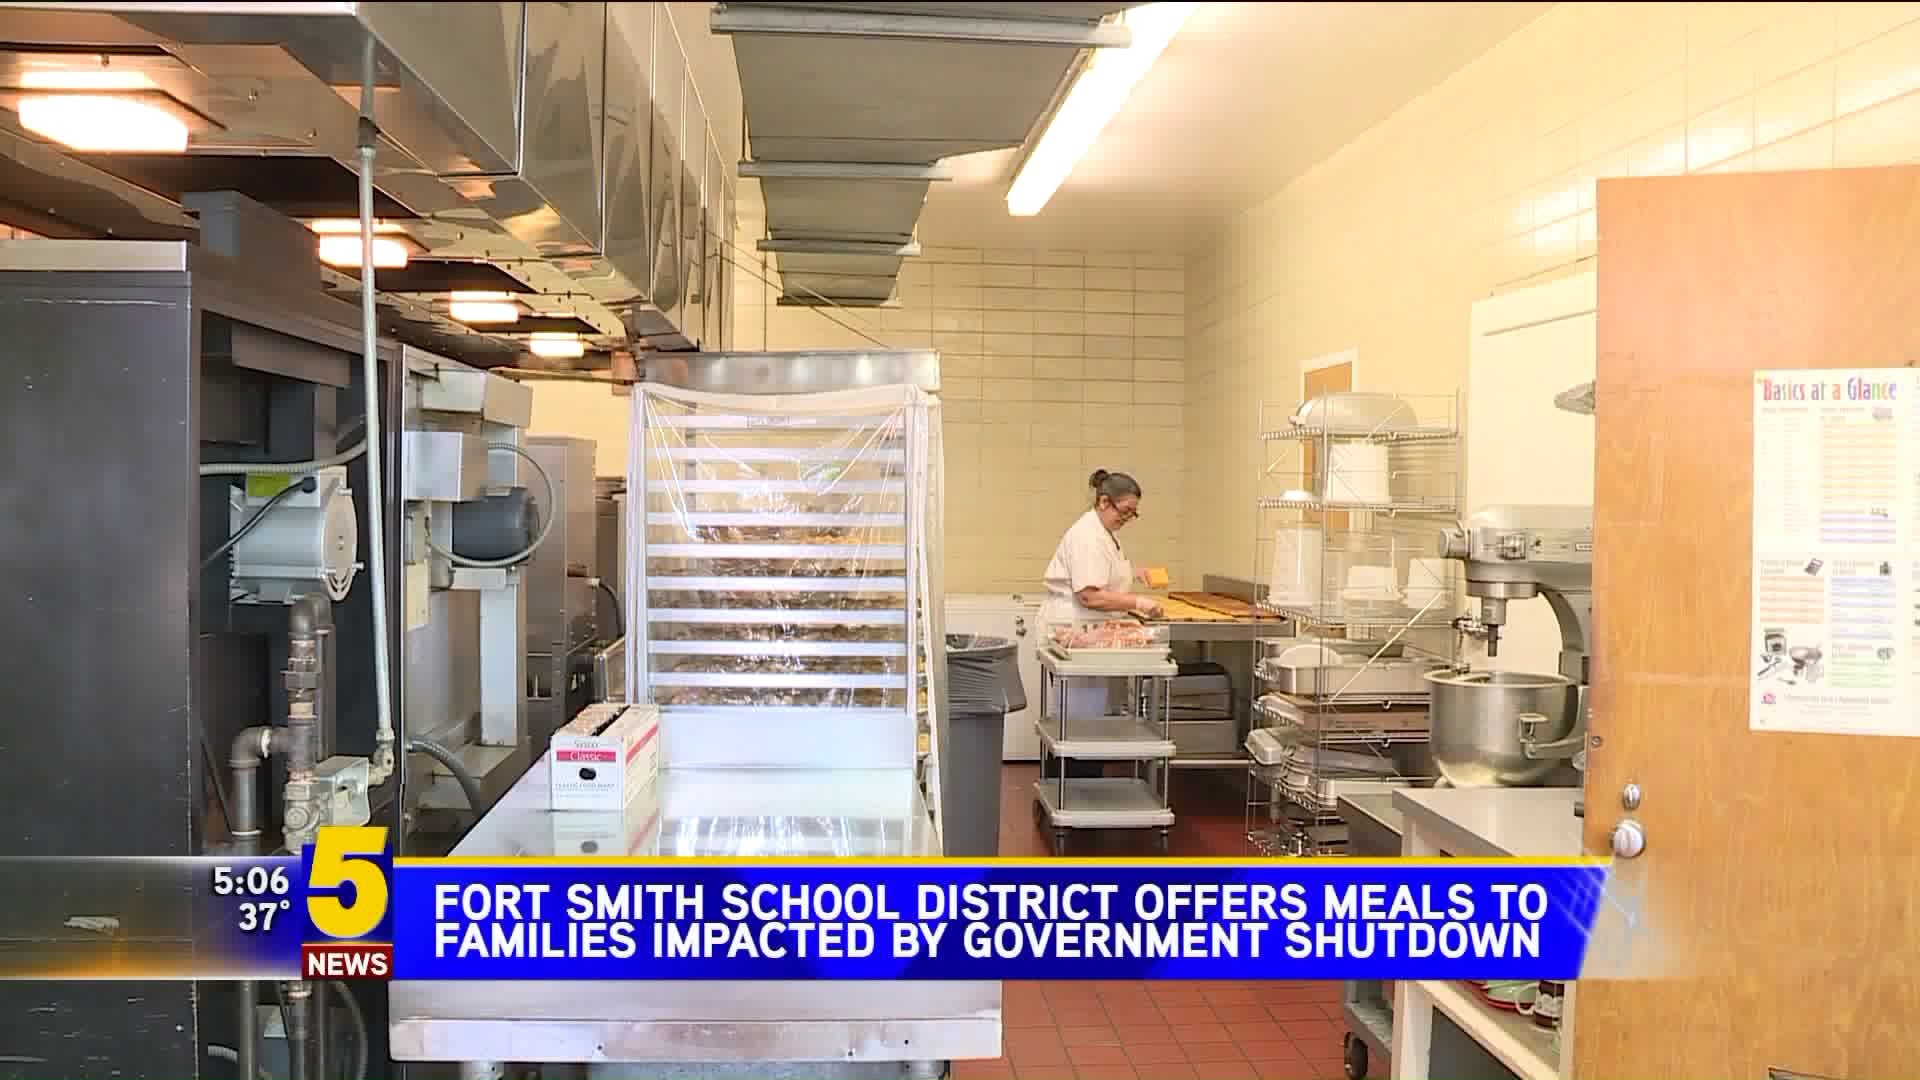 Fort Smith School District Offers Meals To Families Impacted By Government Shutdown